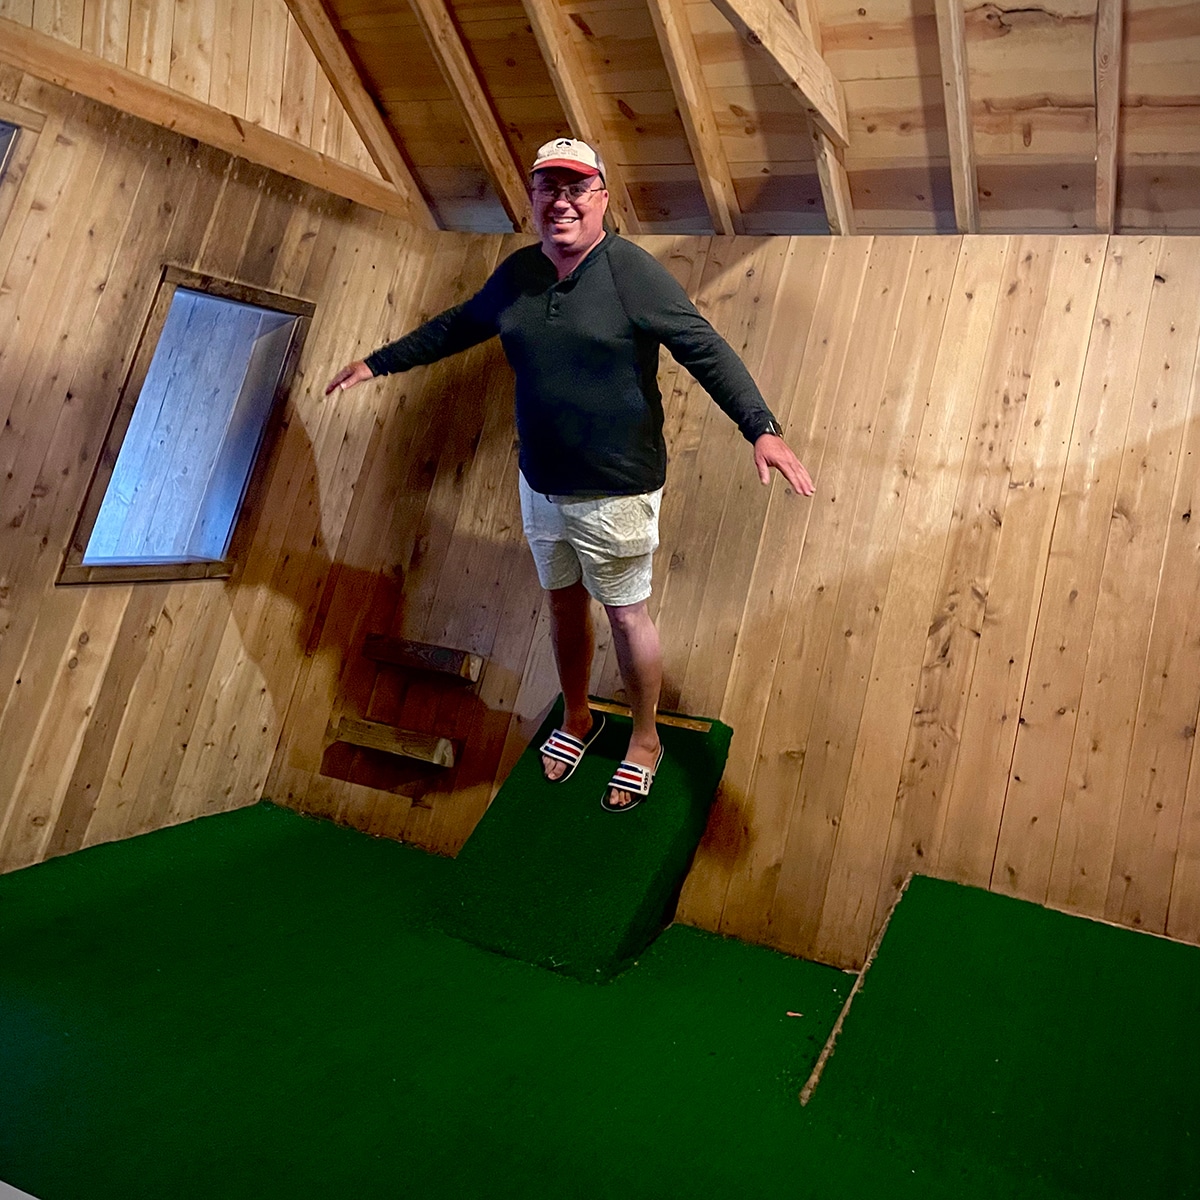 Steve balancing in a room that presents an optical illusion of being crooked at The Mystery Spot in Michigan's UP.